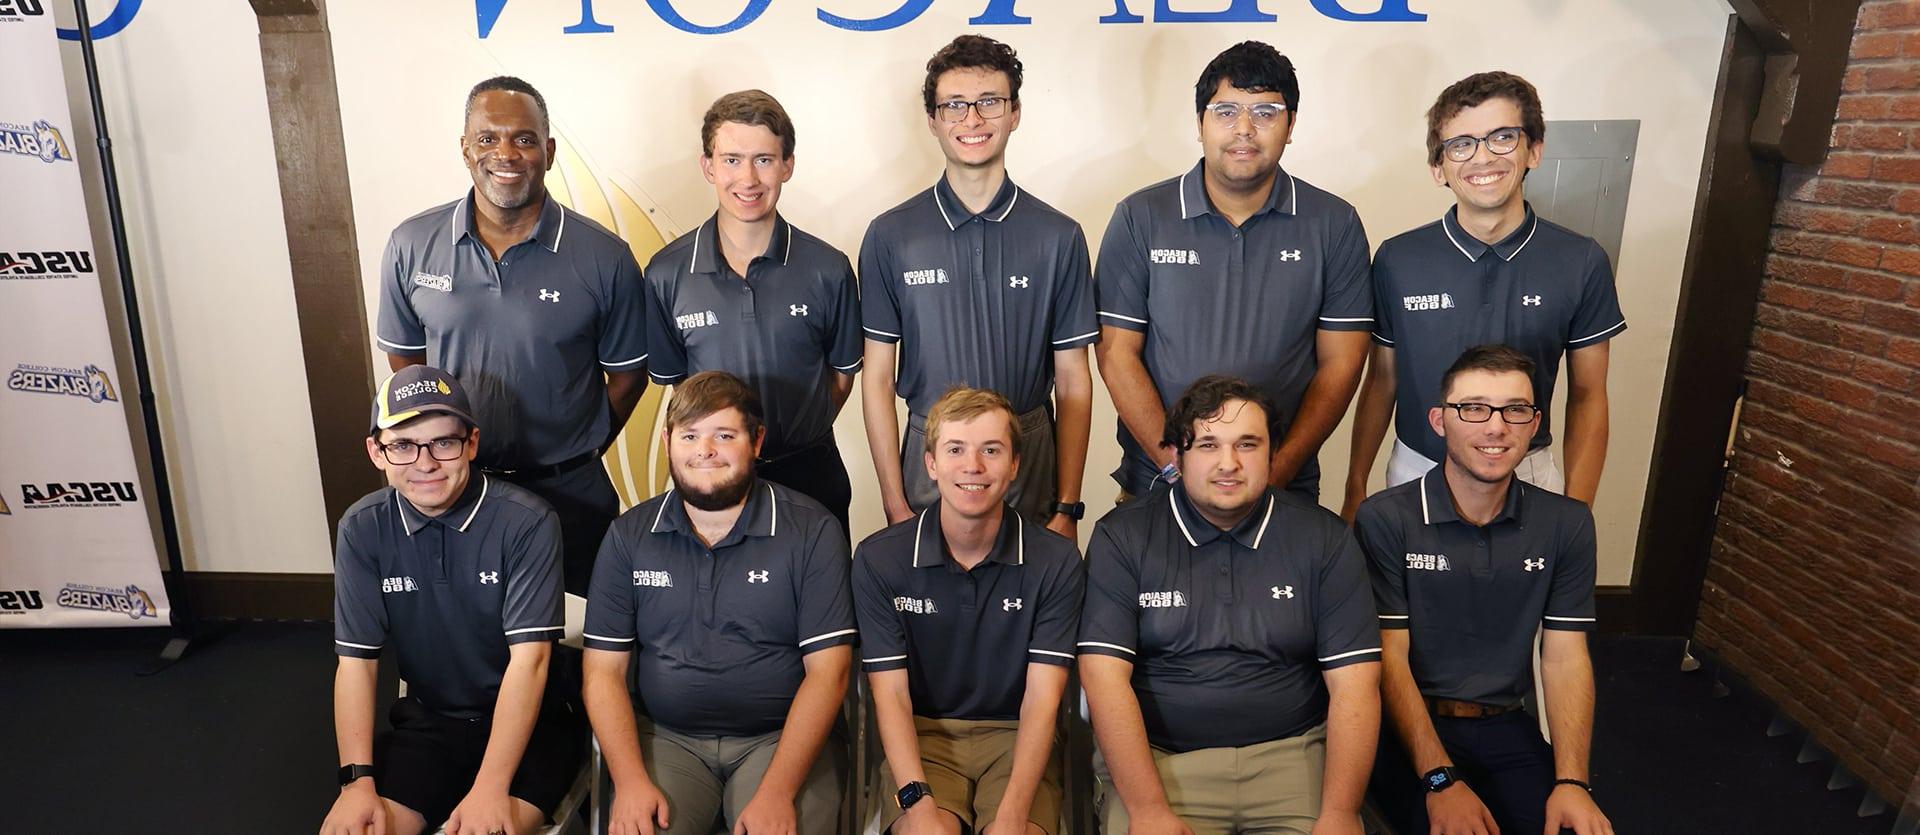 Golf Roster Photo